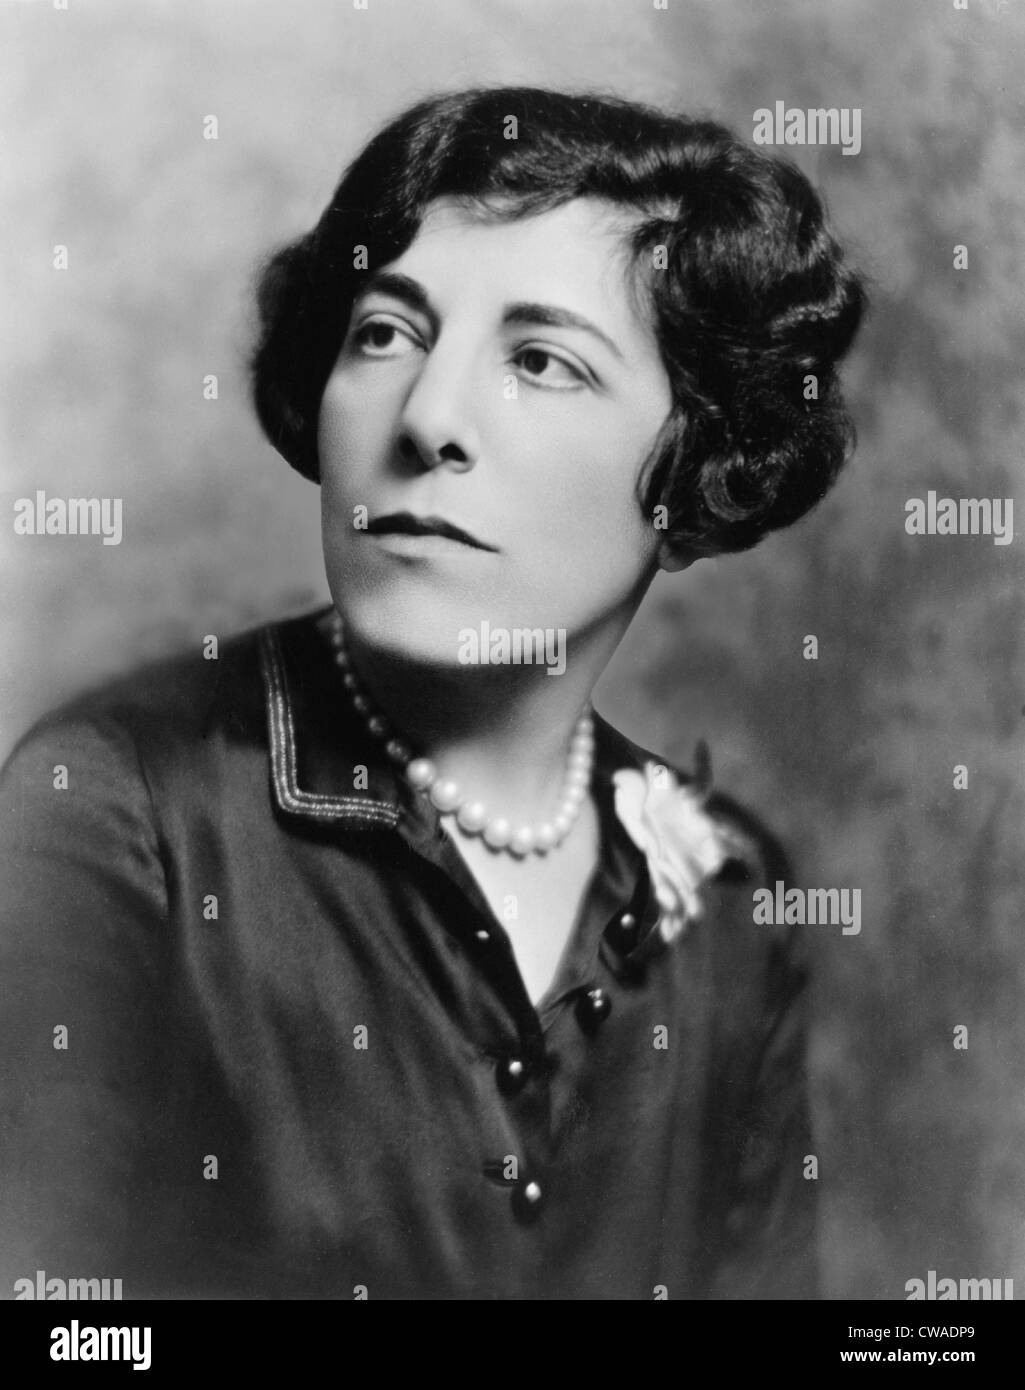 Edna Ferber (1887-1968) author  of many novels later made into motion pictures including, SHOWBOAT (1926), GIANT (1952), and Stock Photo